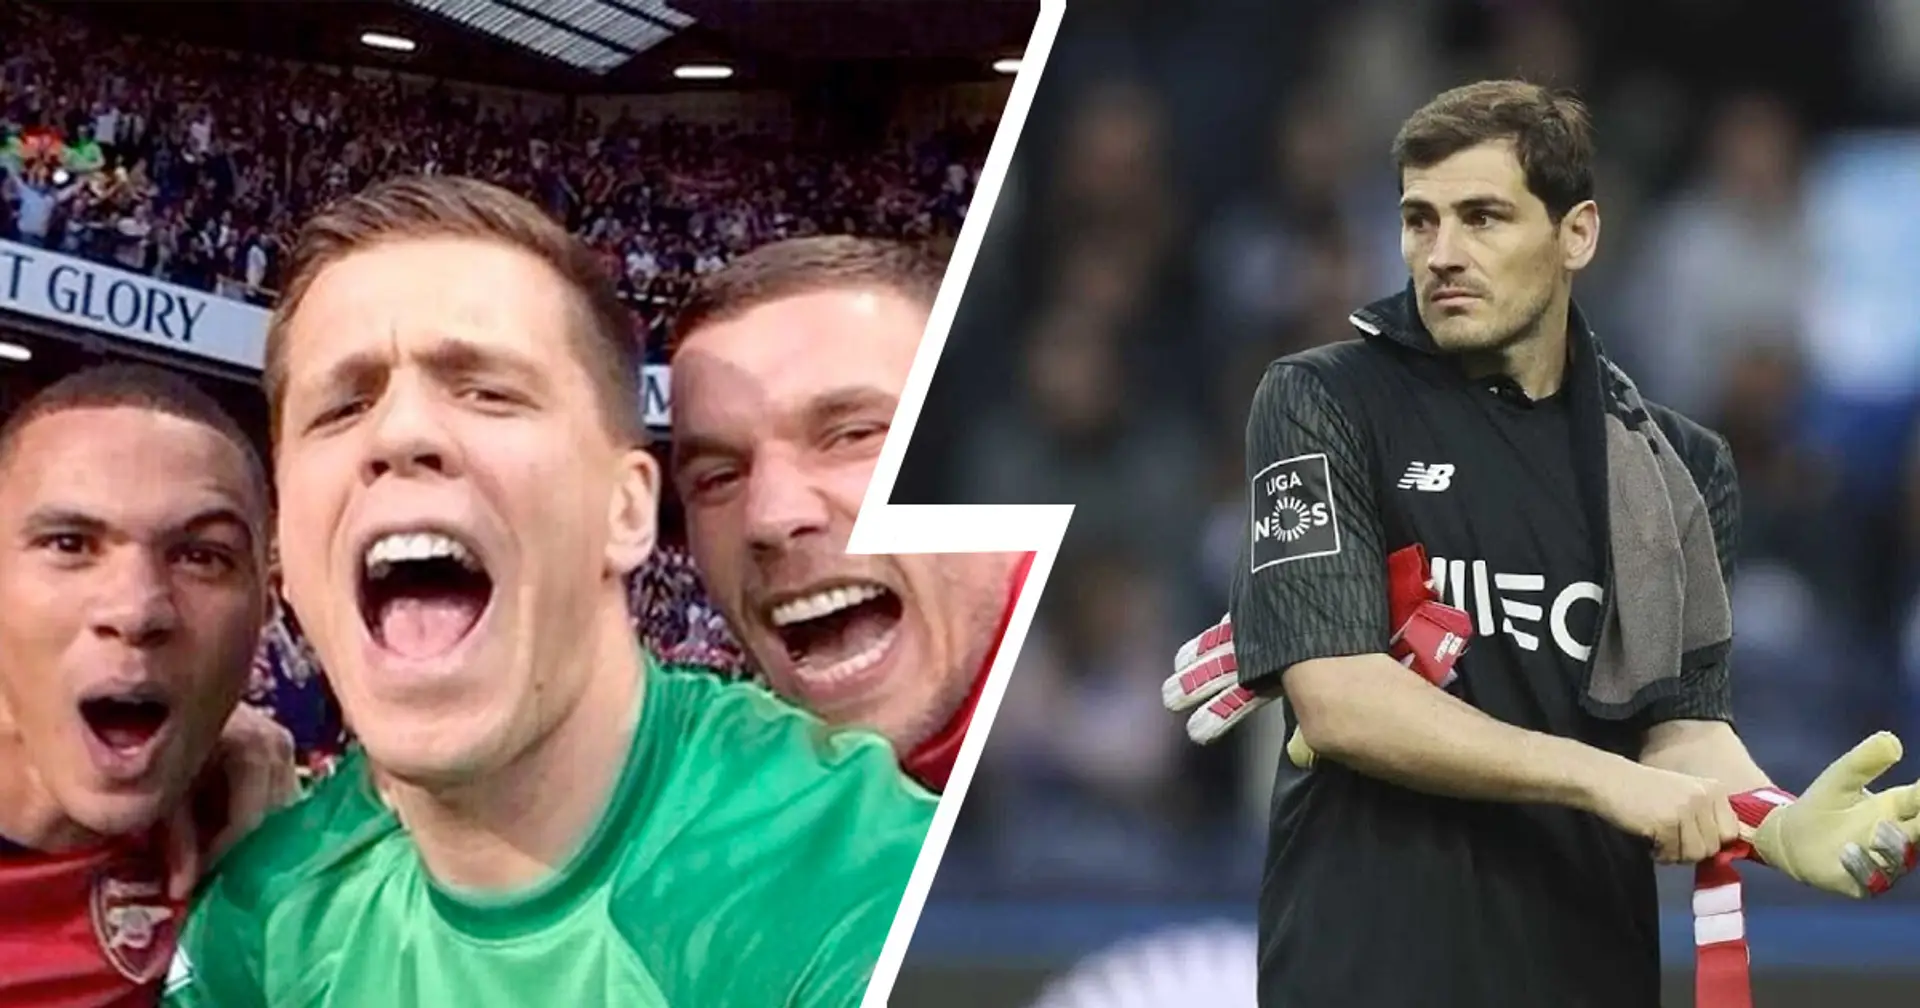 "You never see Casillas doing that, do you?": Szczesny reveals what Wenger told him after famous selfie at White Hart Lane